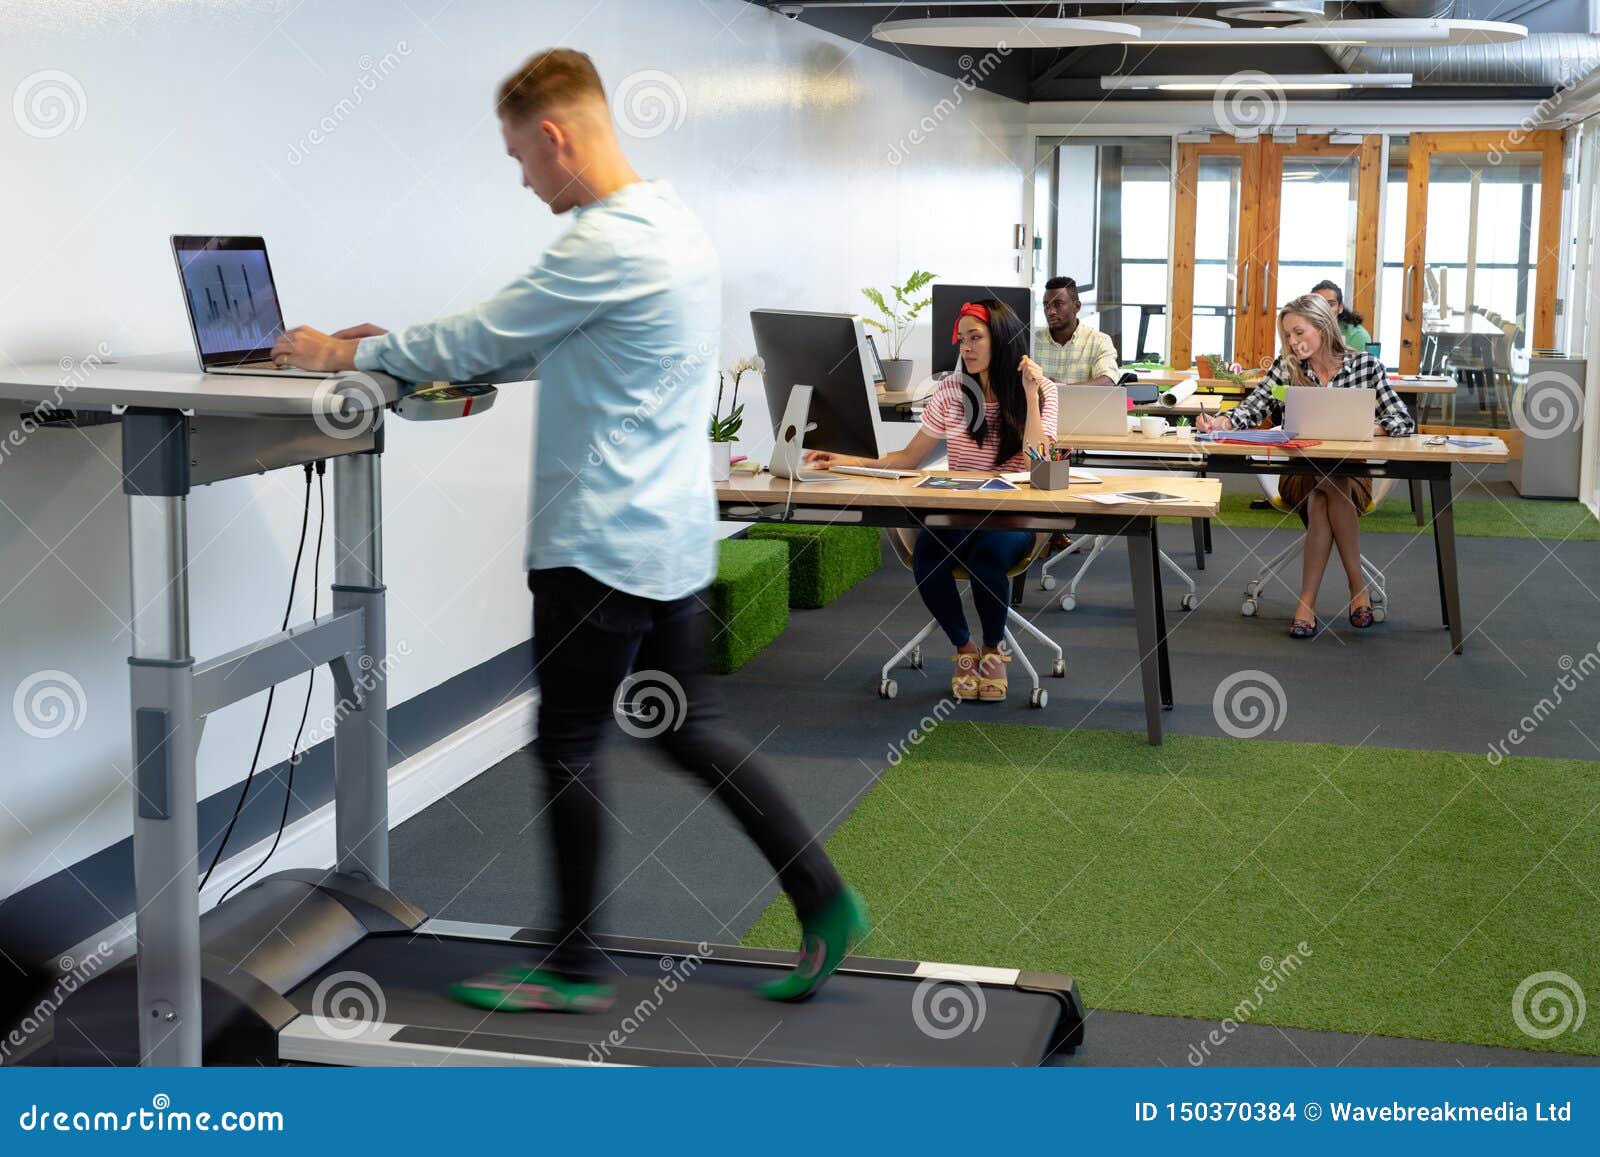 Businessman Working On Laptop While Exercising On Treadmill In A